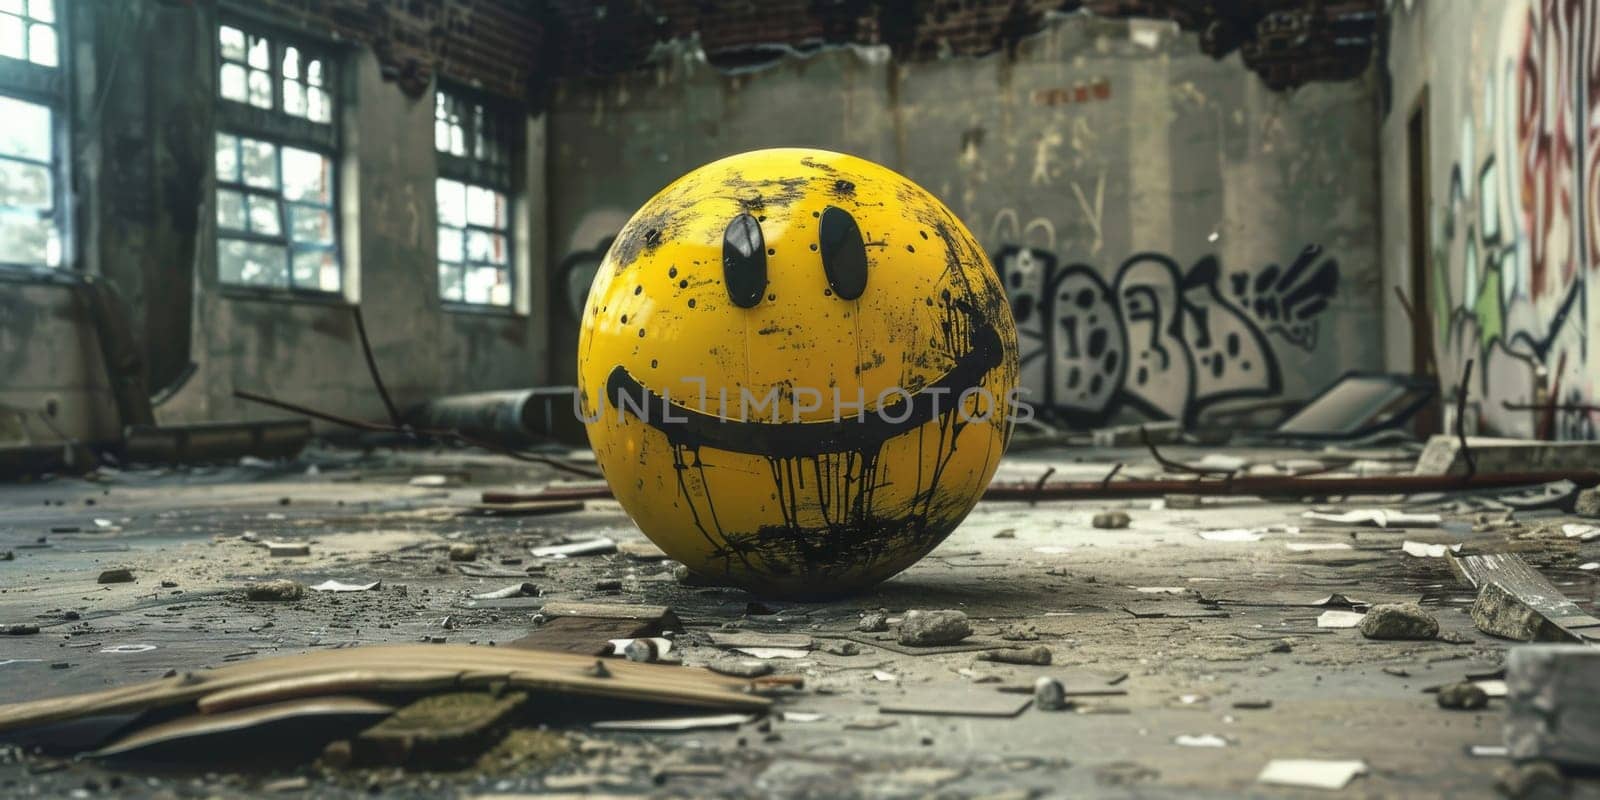 A bright yellow ball with a smiley face painted on it by Kadula